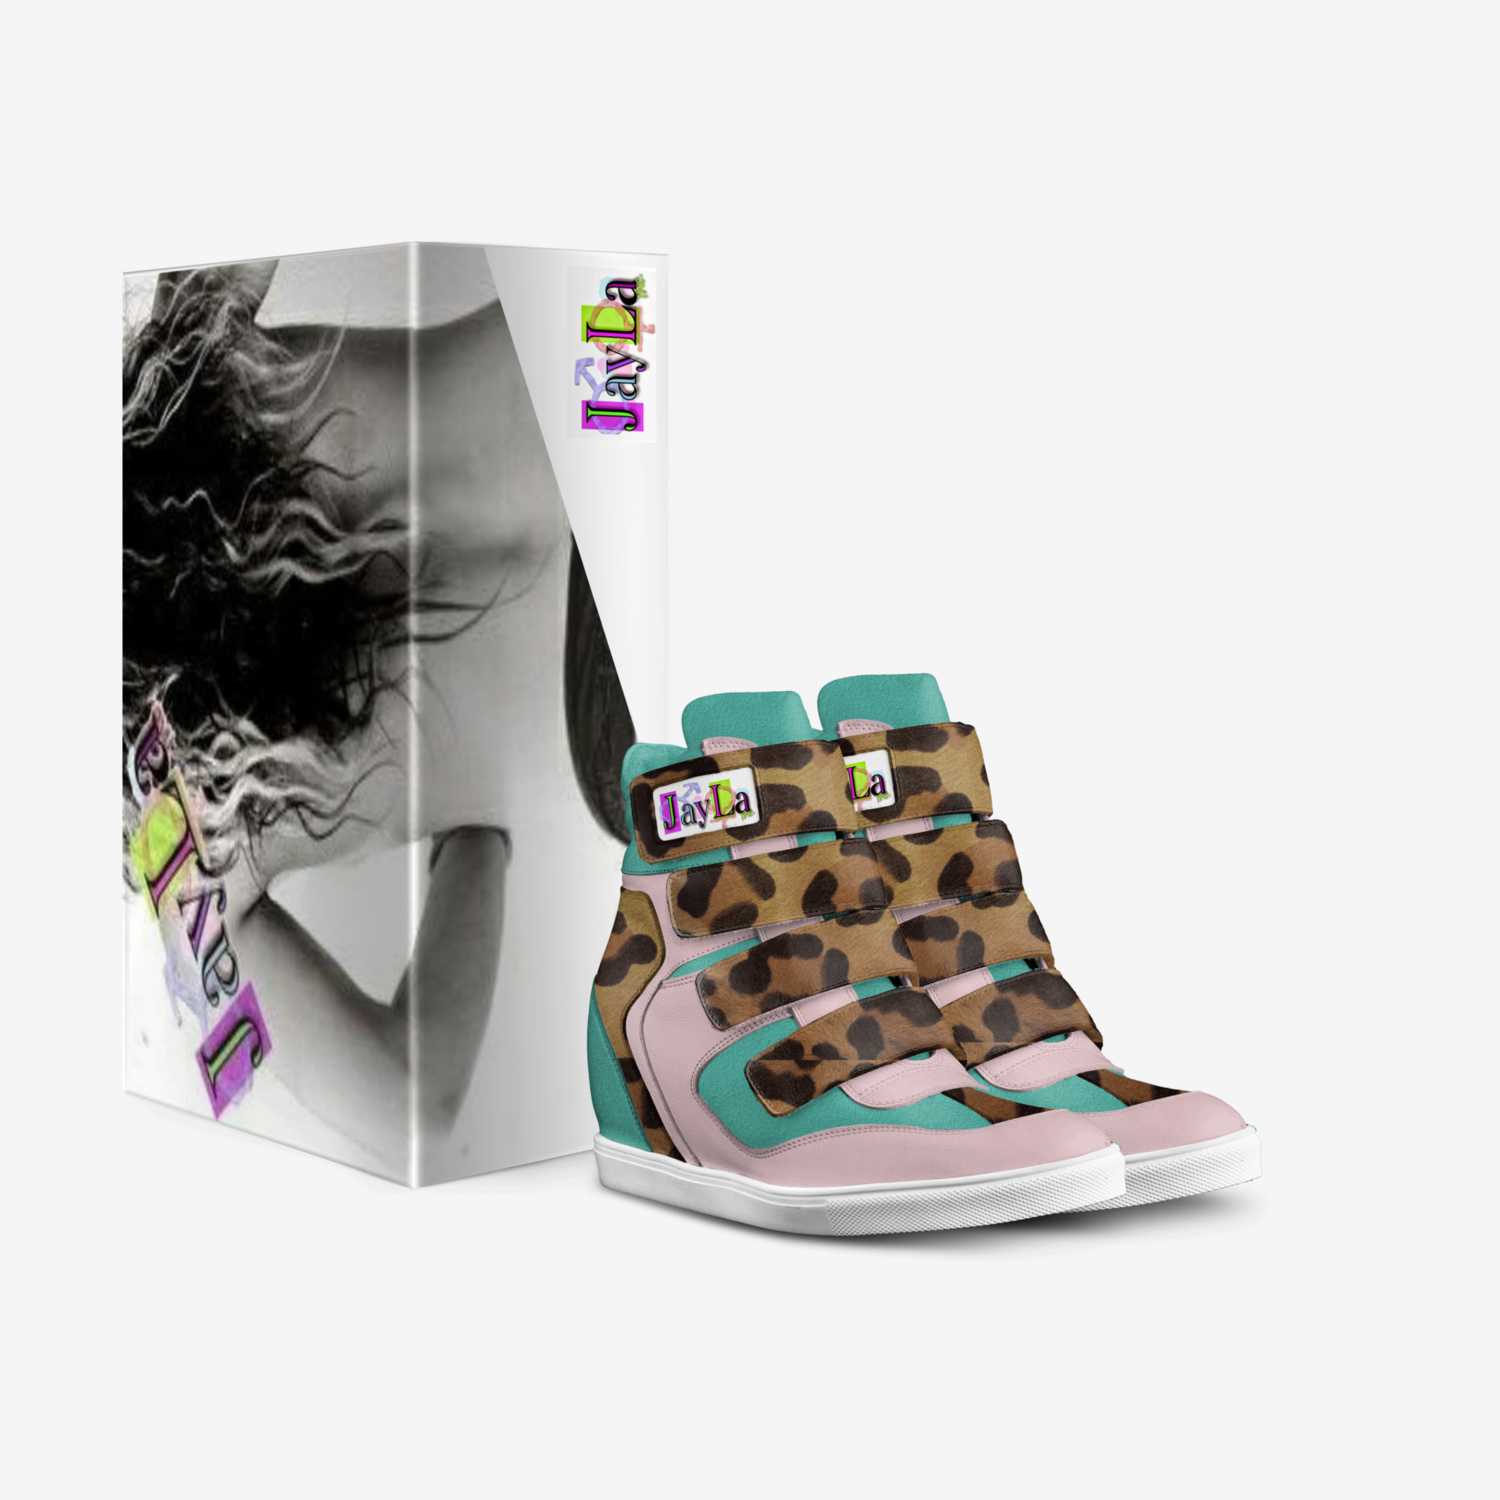 JayLa's Femella custom made in Italy shoes by Jayla Inc | Box view